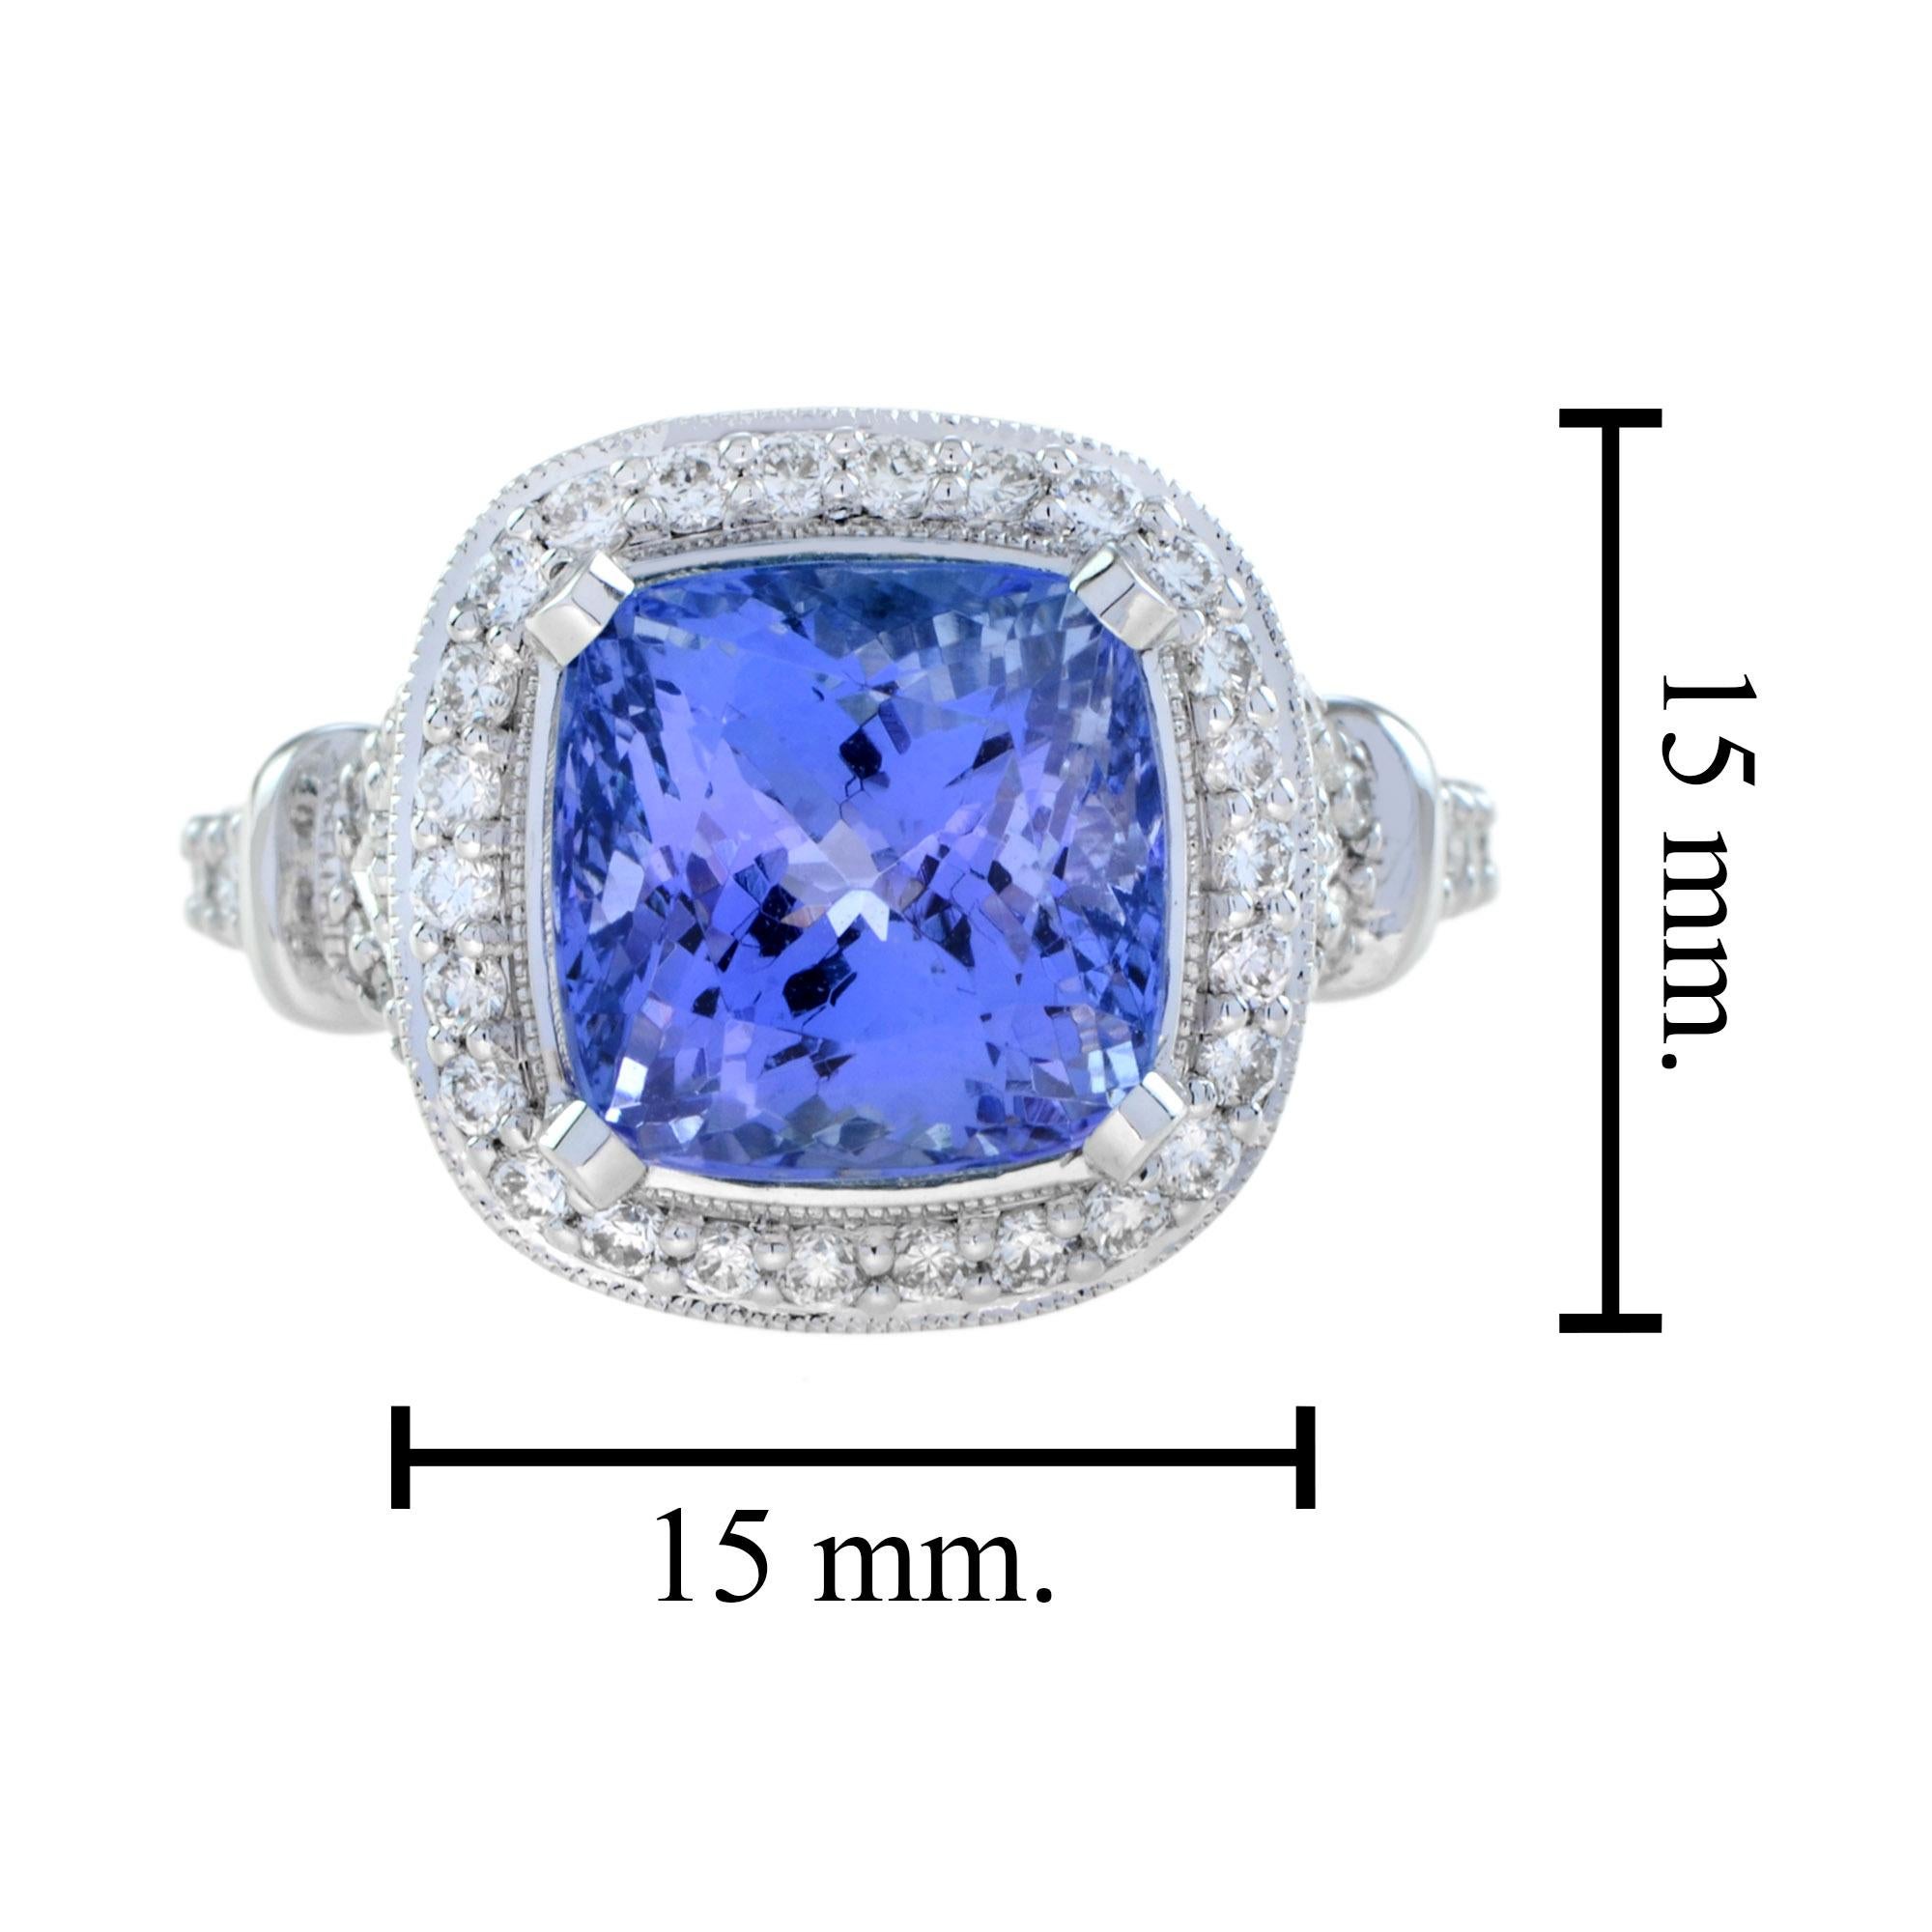 Cushion Cut Certified 6.68 Ct. Cushion Tanzanite Diamond Engagement Ring in 18K White Gold For Sale